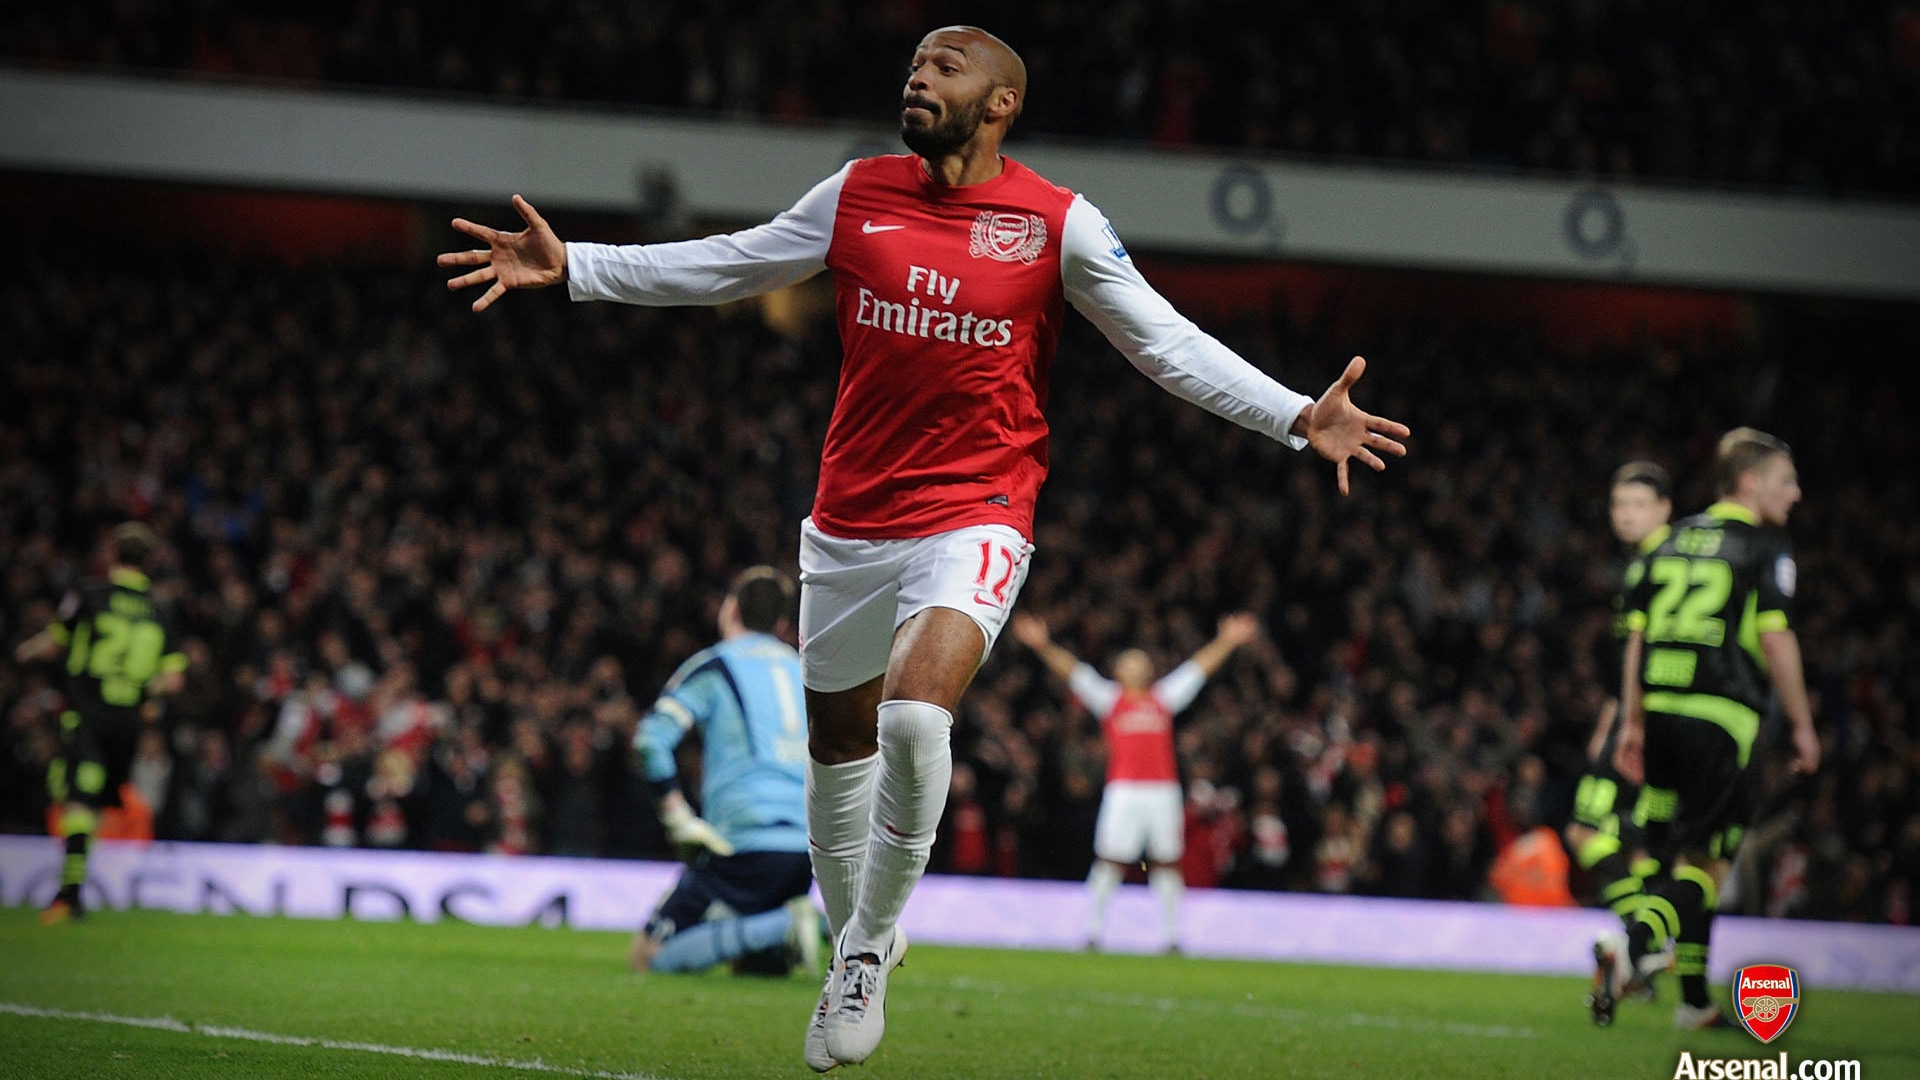 Thierry Henry for 1920 x 1080 HDTV 1080p resolution